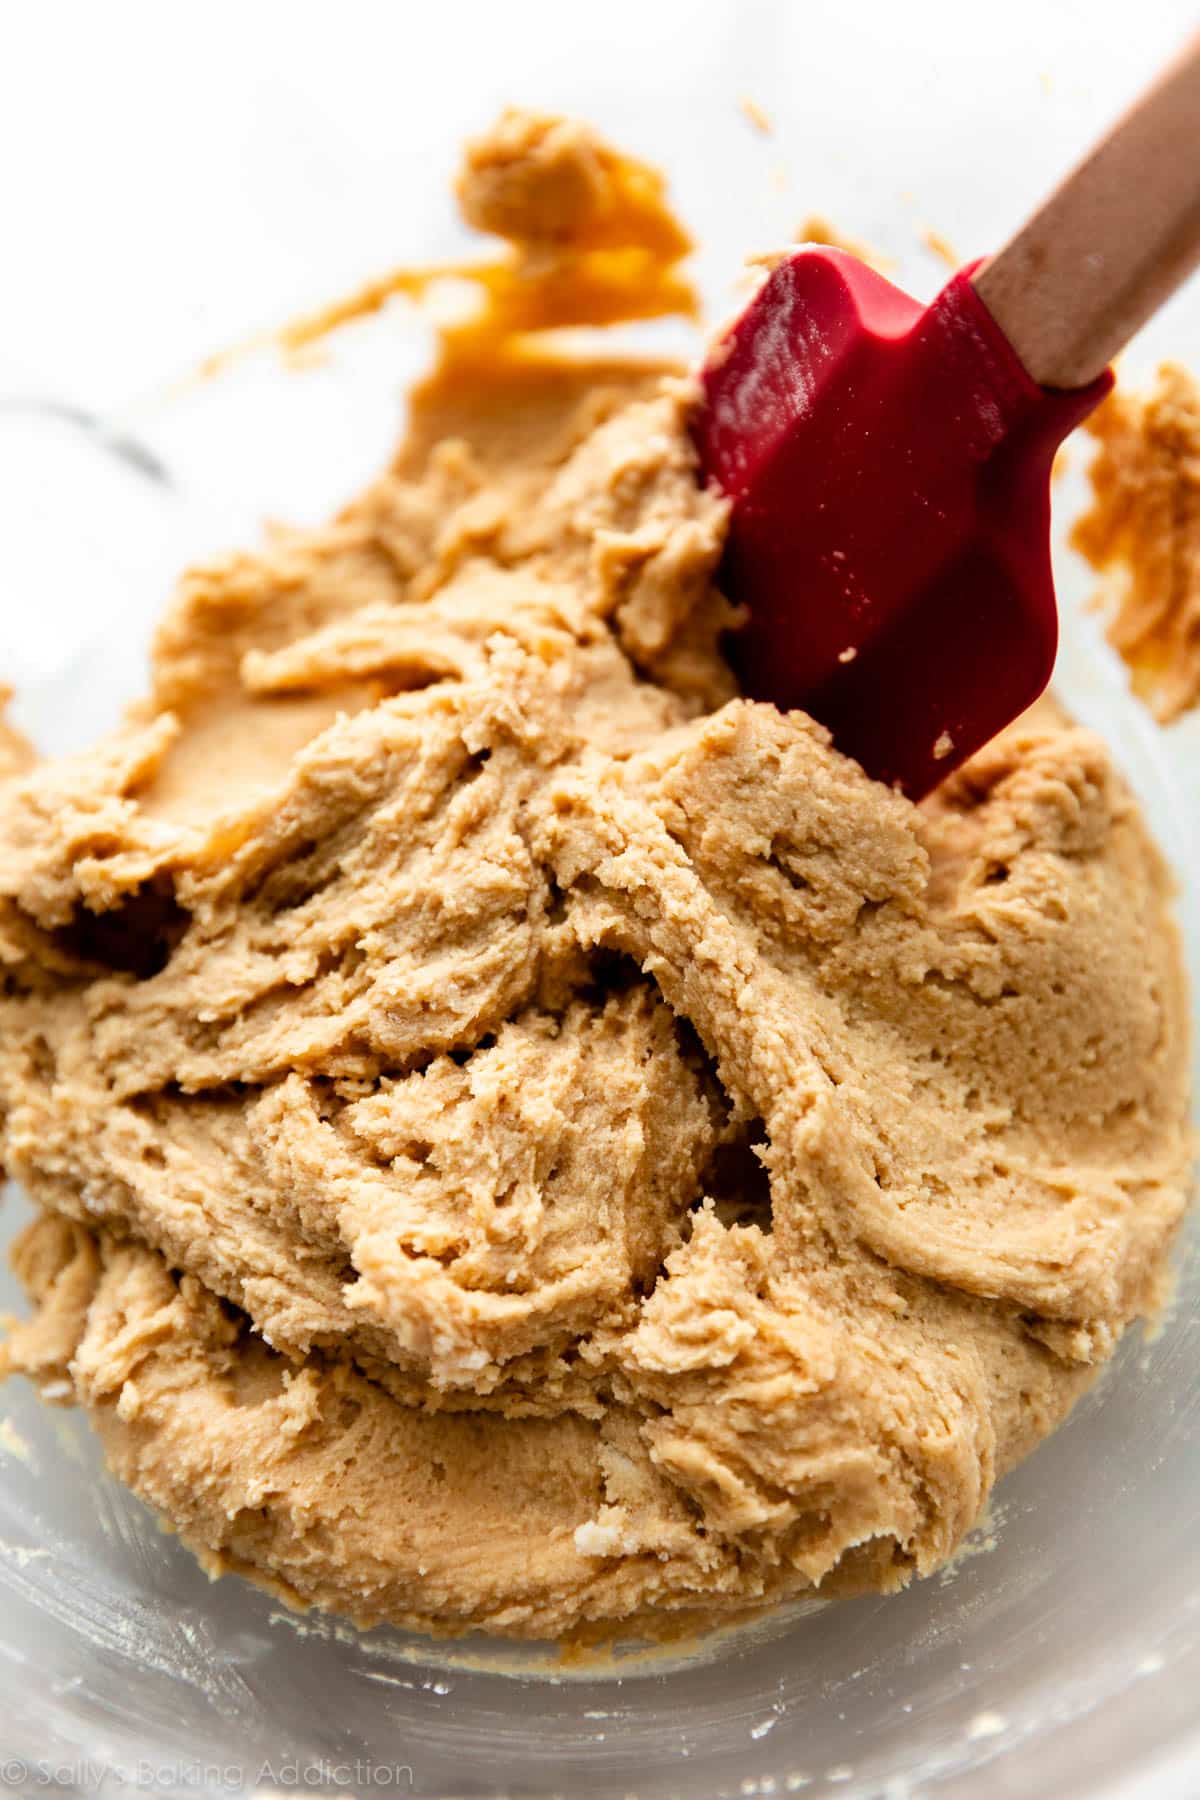 Smooth and creamy peanut butter cookie dough